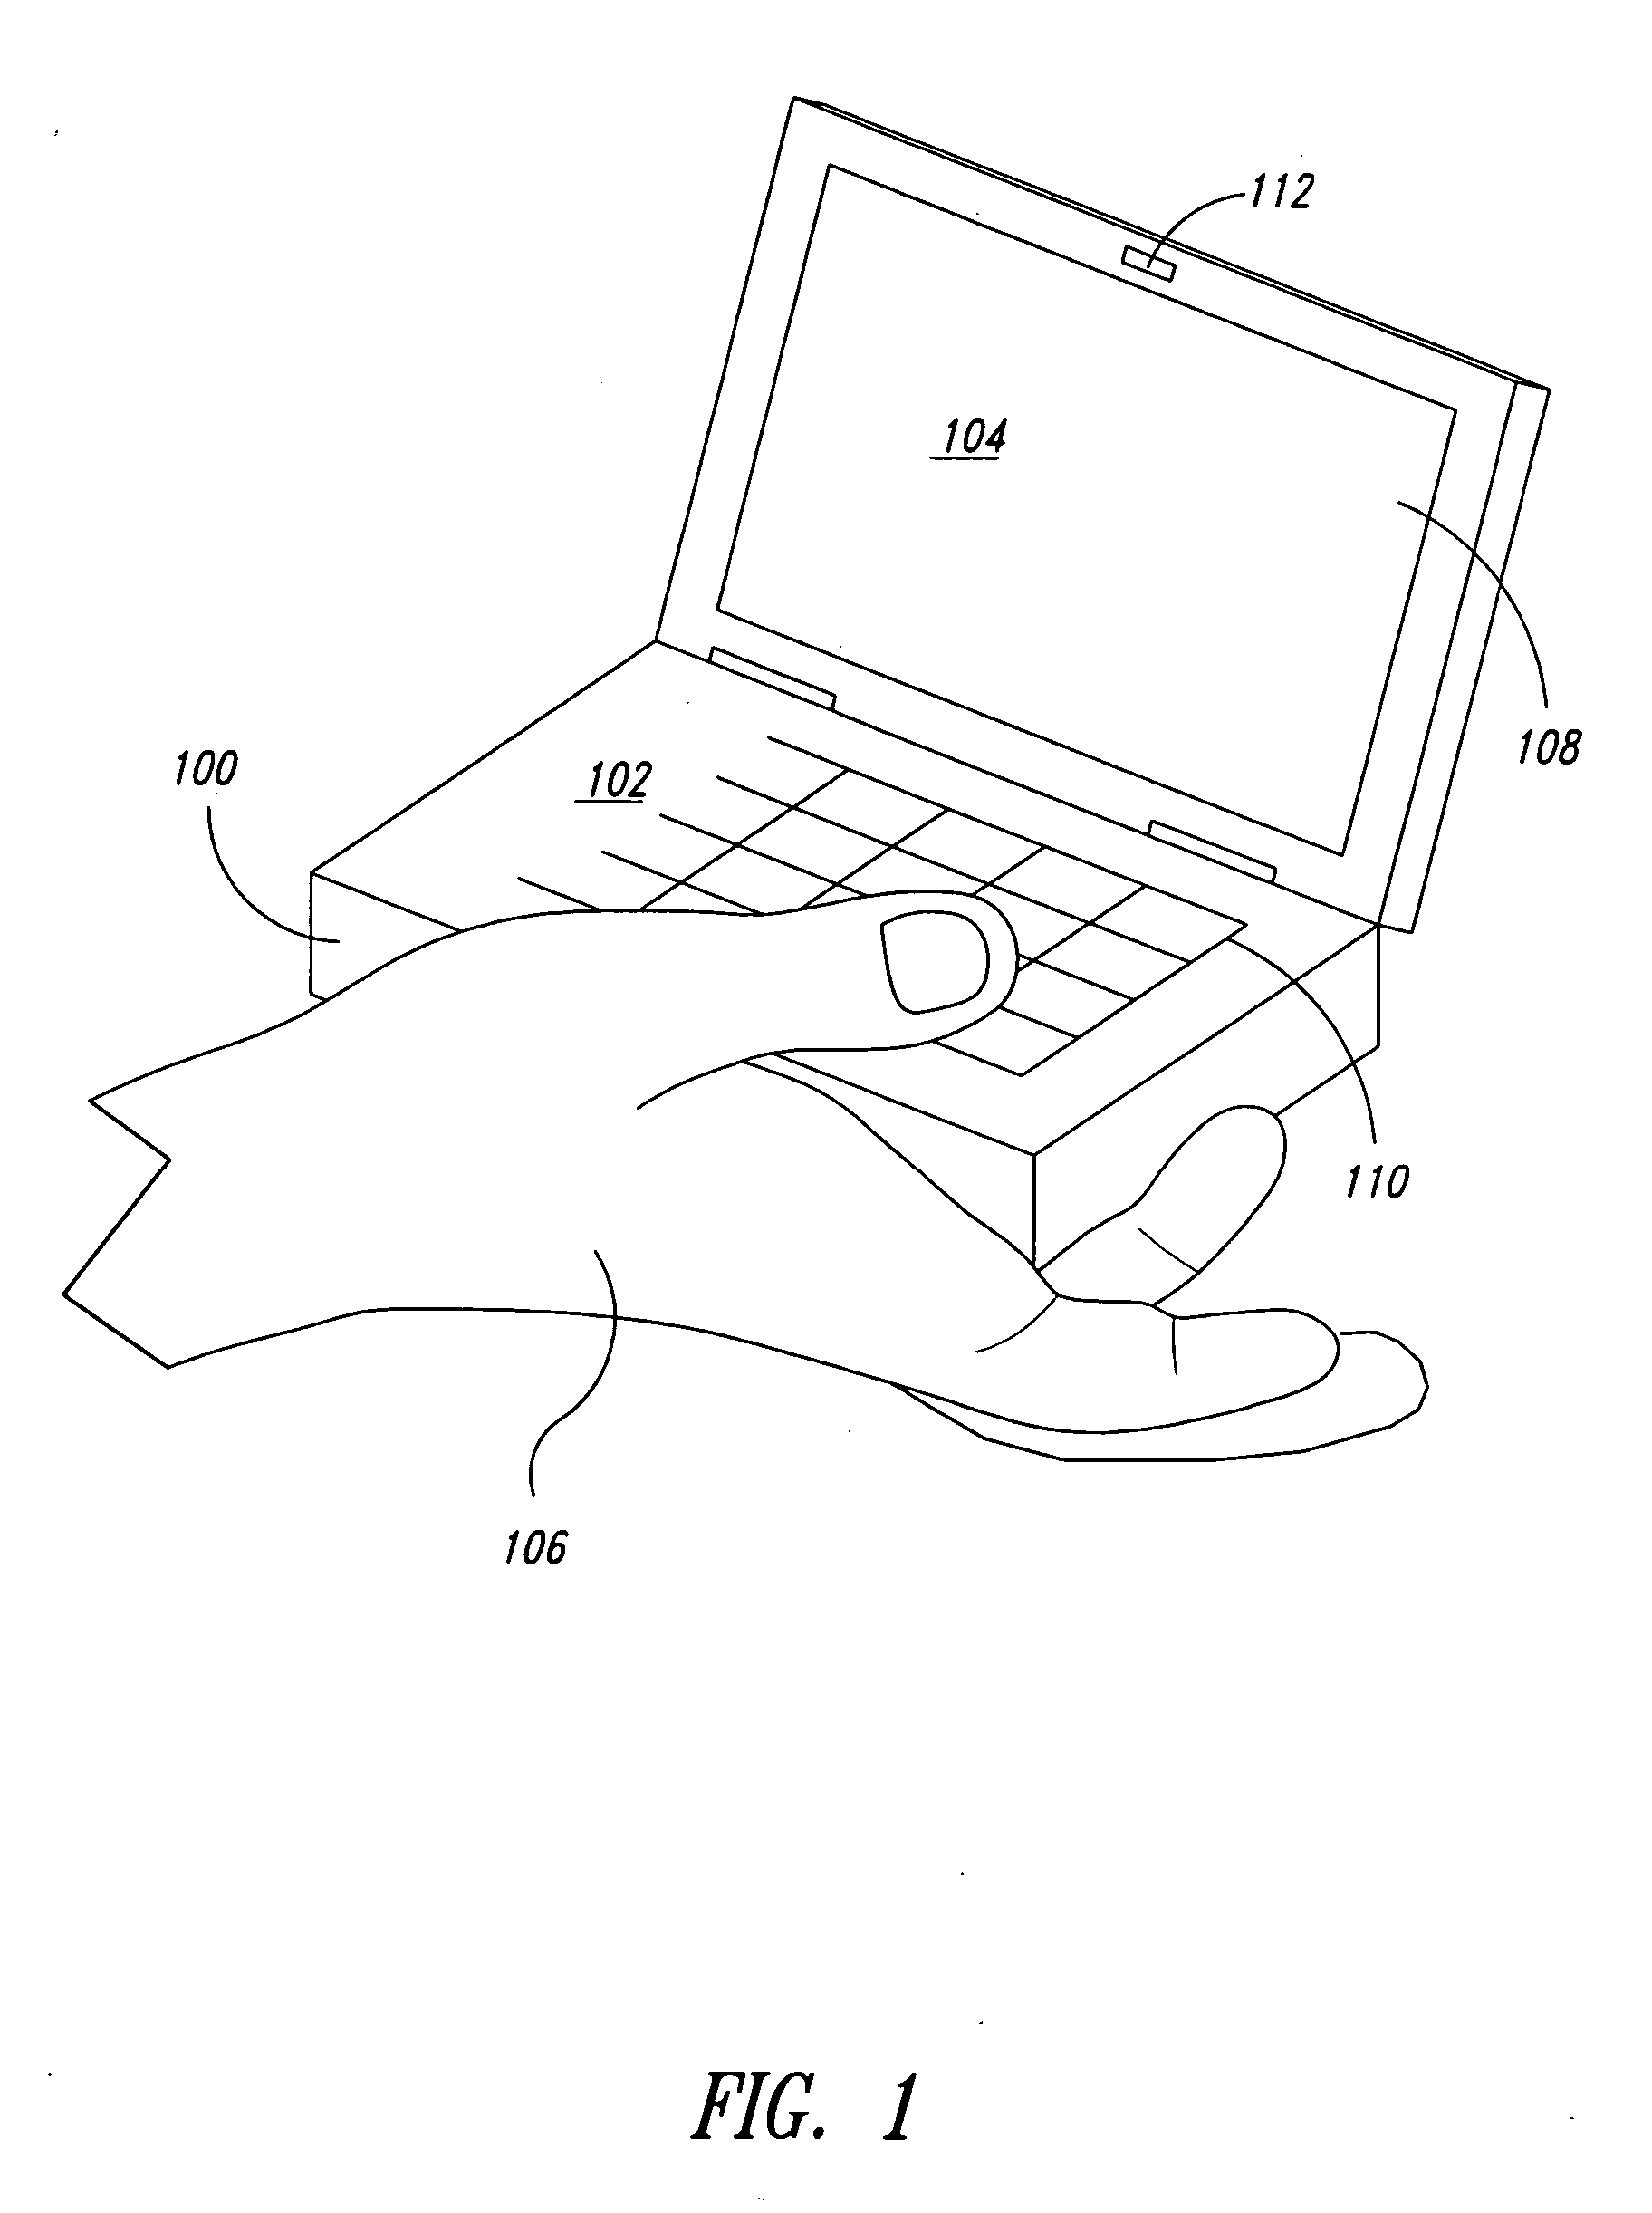 Low power media player for an electronic device